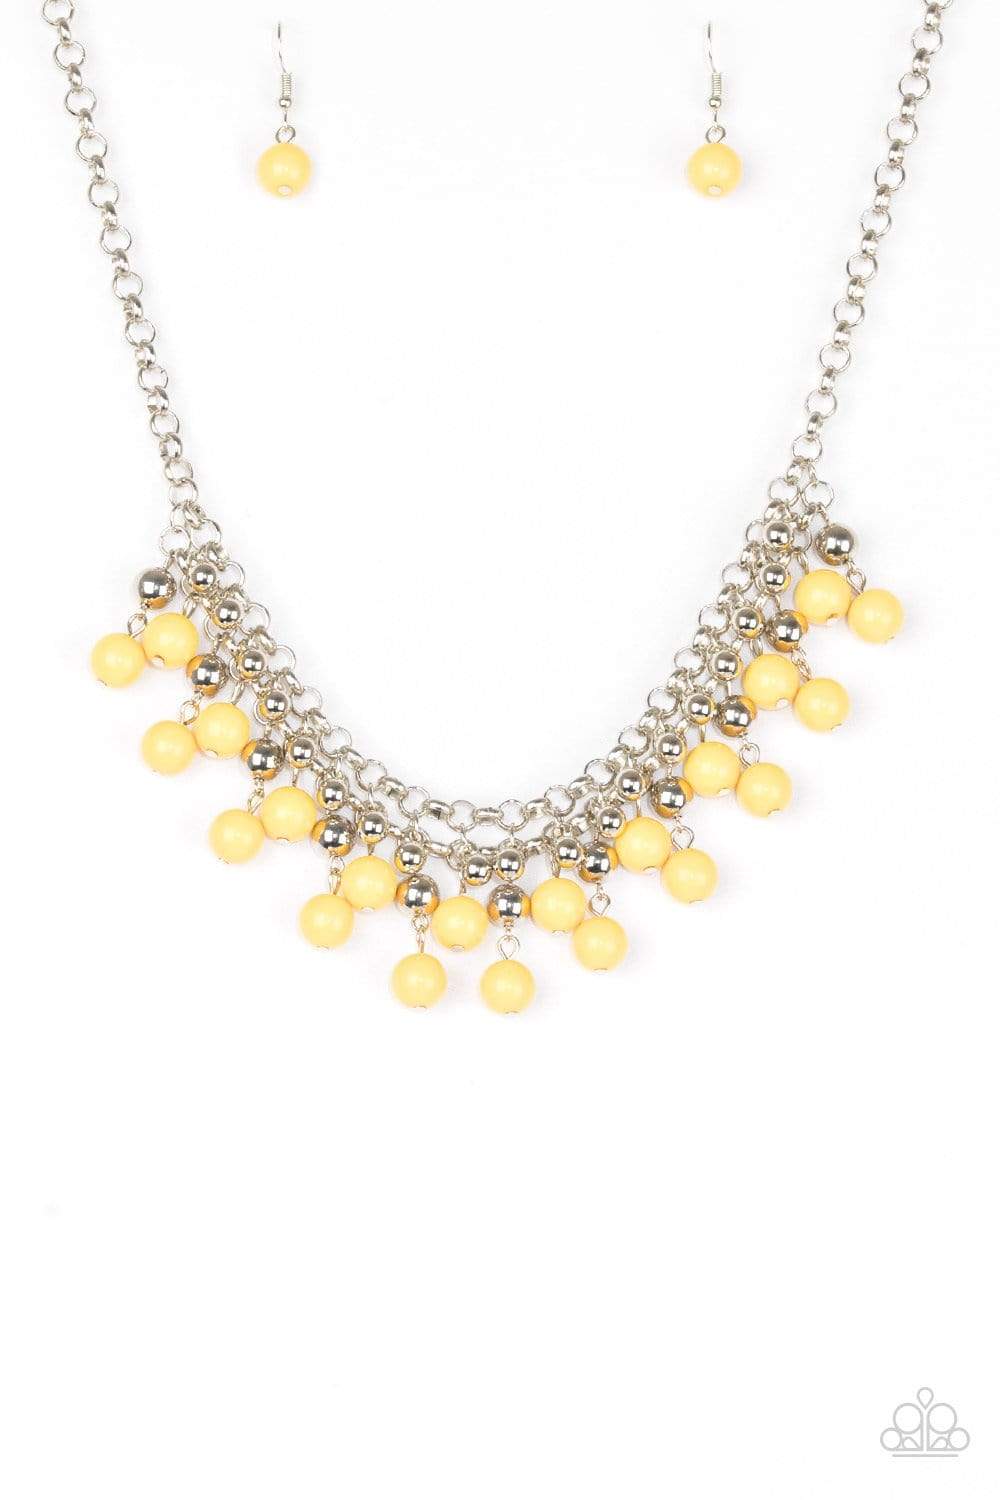 Paparazzi Accessories Take The COLOR Wheel! - Yellow Necklace – Be Adored  Jewelry